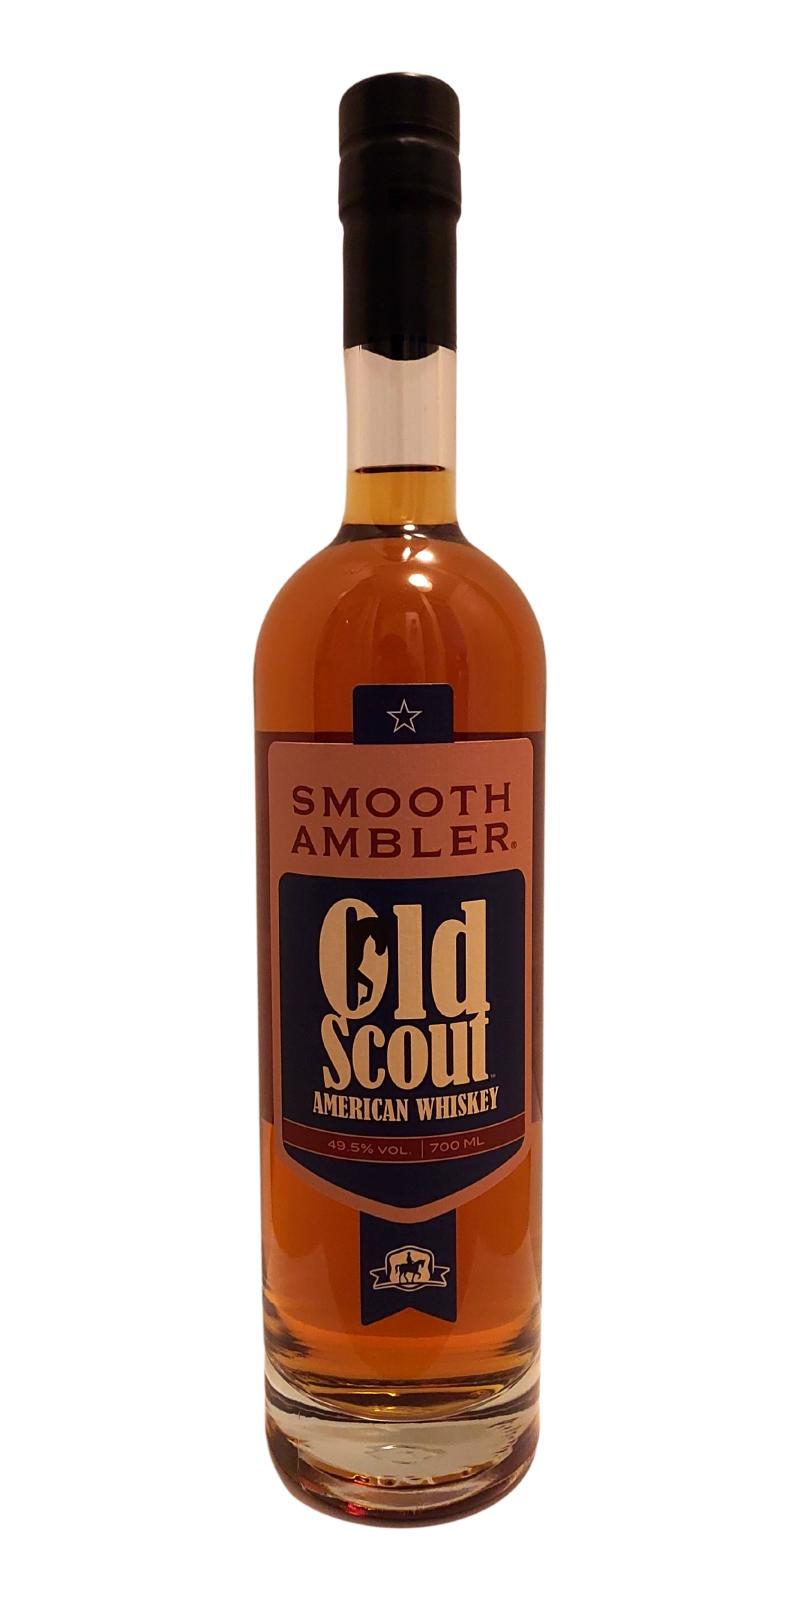 Smooth Ambler Old Scout American Whisky Batch 127 49.5% 700ml